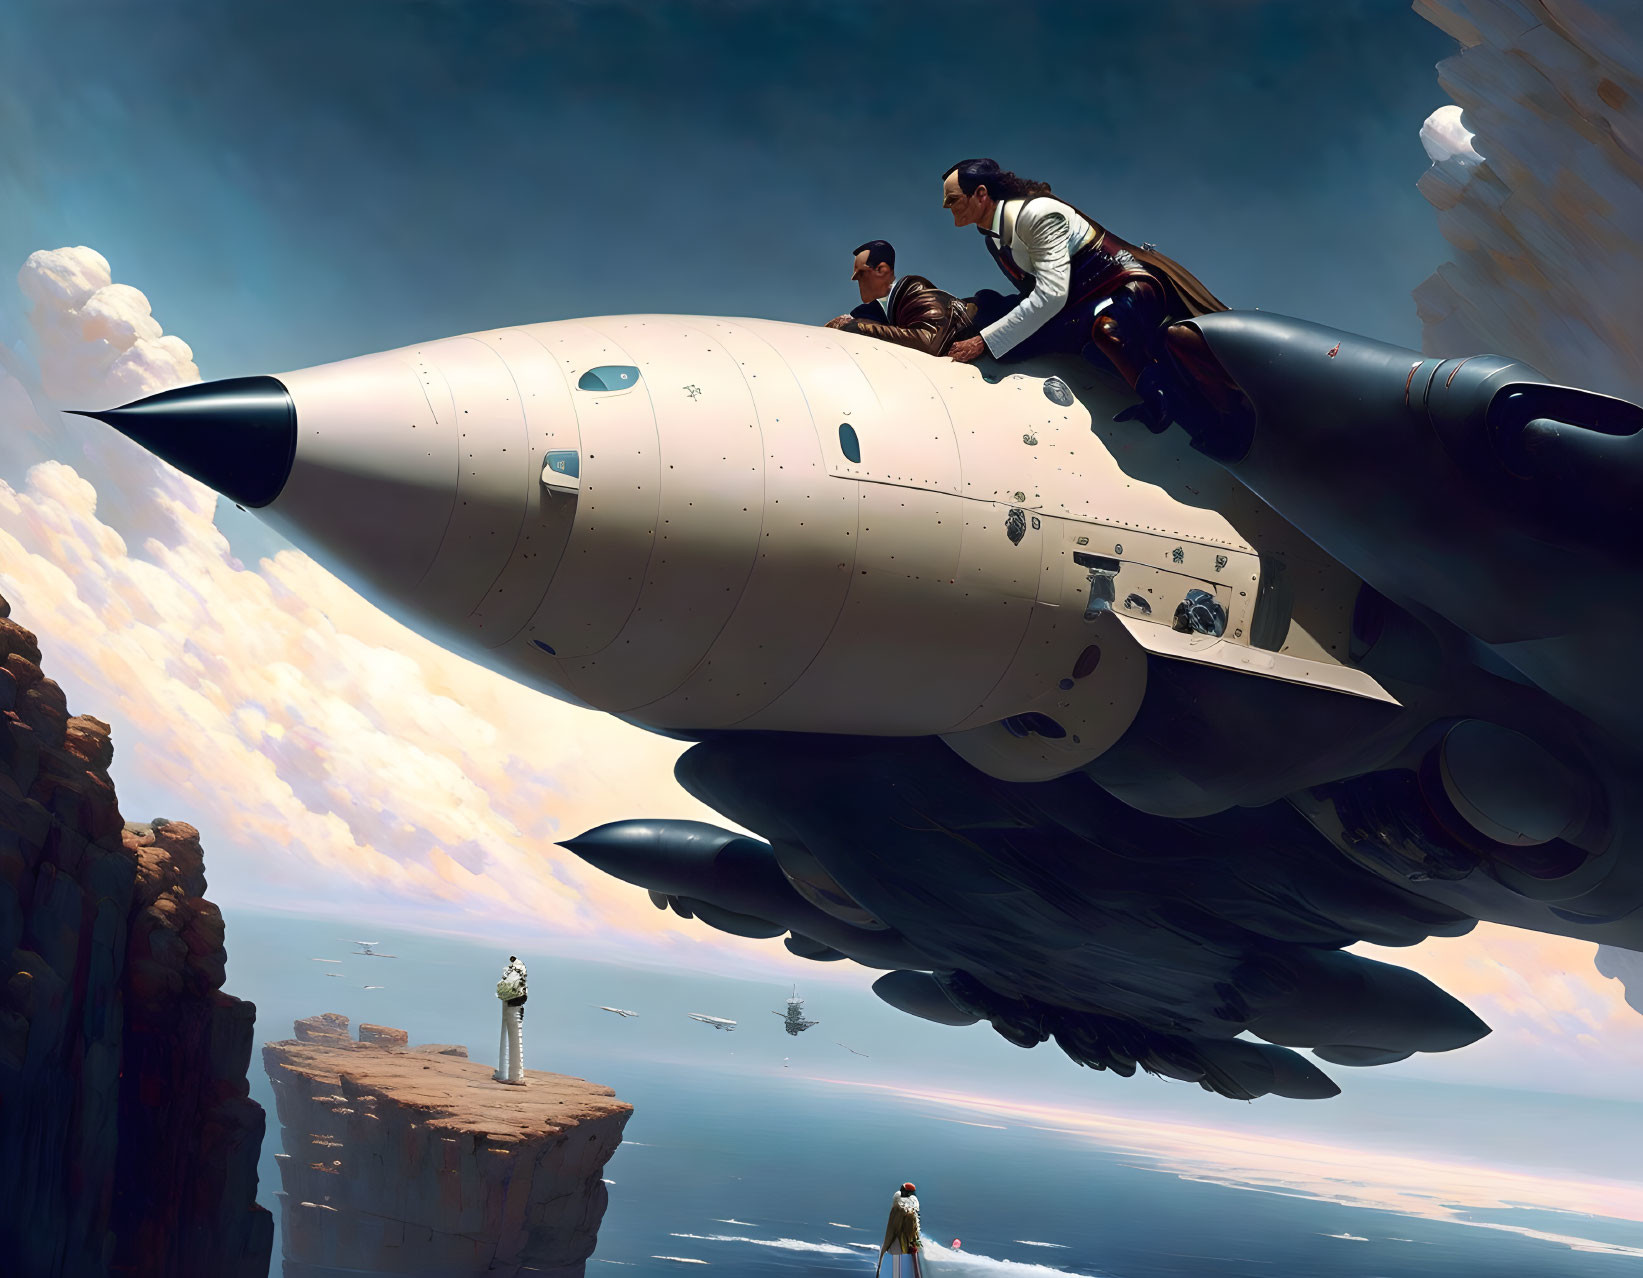 Adventure-themed surreal scene with aircraft, statue, and ships.